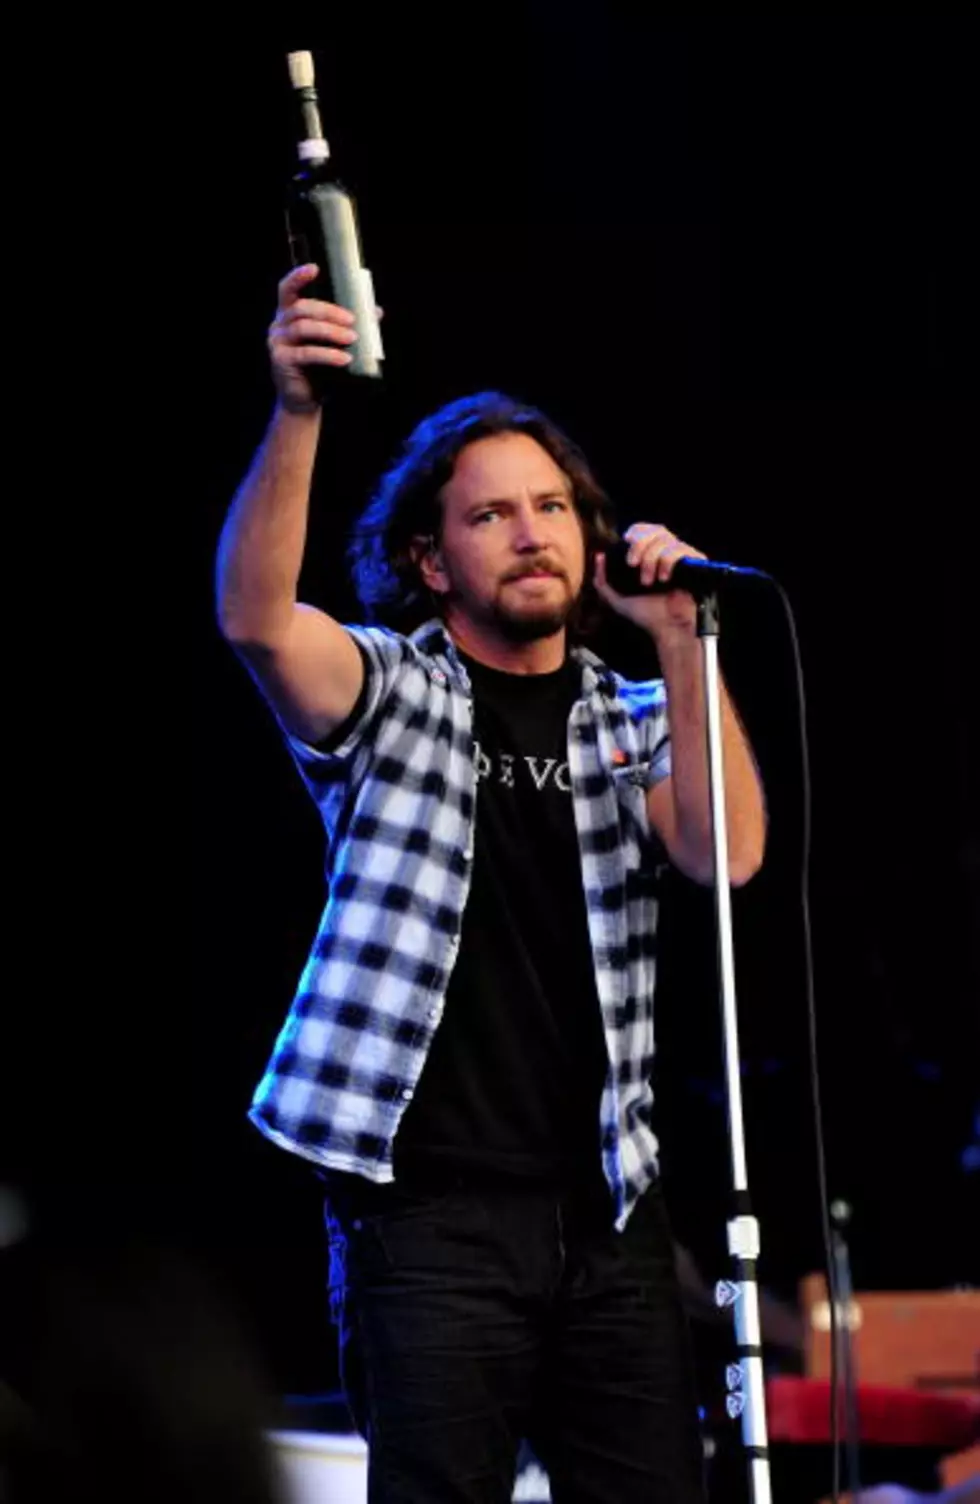 Foreign Students Learn English With Help From Pearl Jam